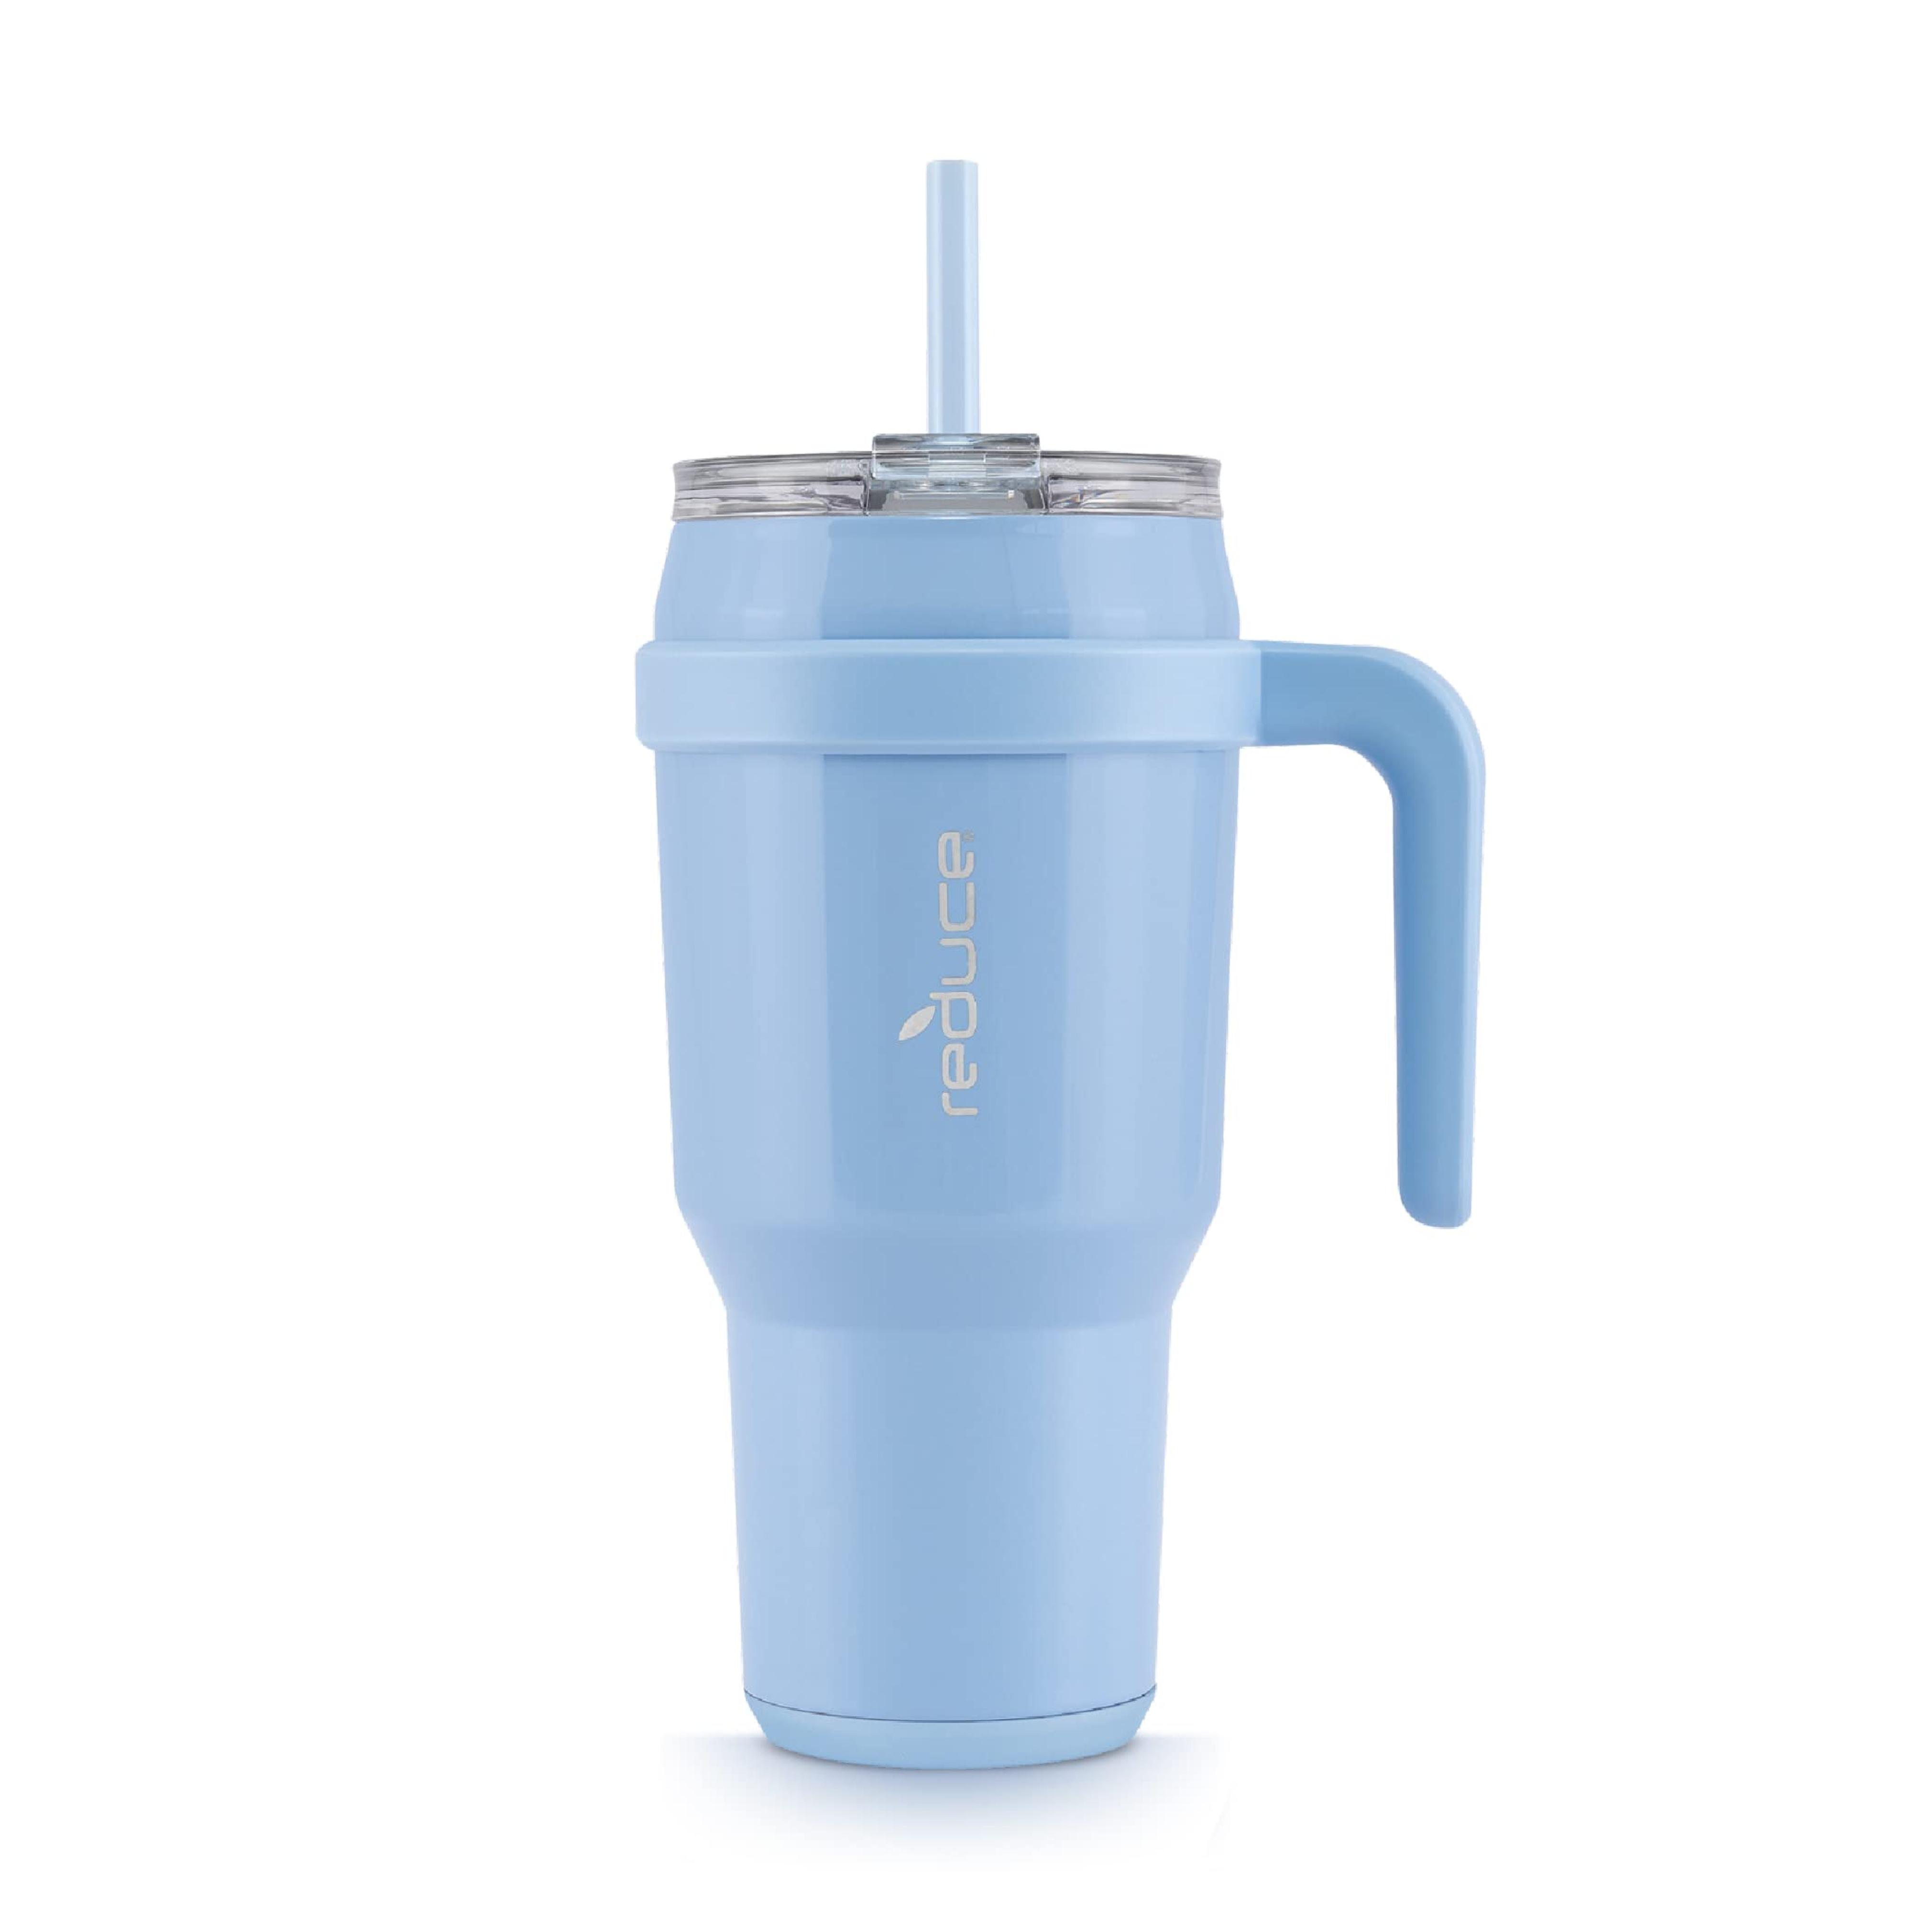 REDUCE 40 oz Tumbler with Handle - Vacuum Insulated Stainless Steel Mug with Sip-It-Your-Way Lid and Straw - Keeps Drinks Cold up to 34 Hours - Sweat Proof, Dishwasher Safe, BPA Free - Glacier